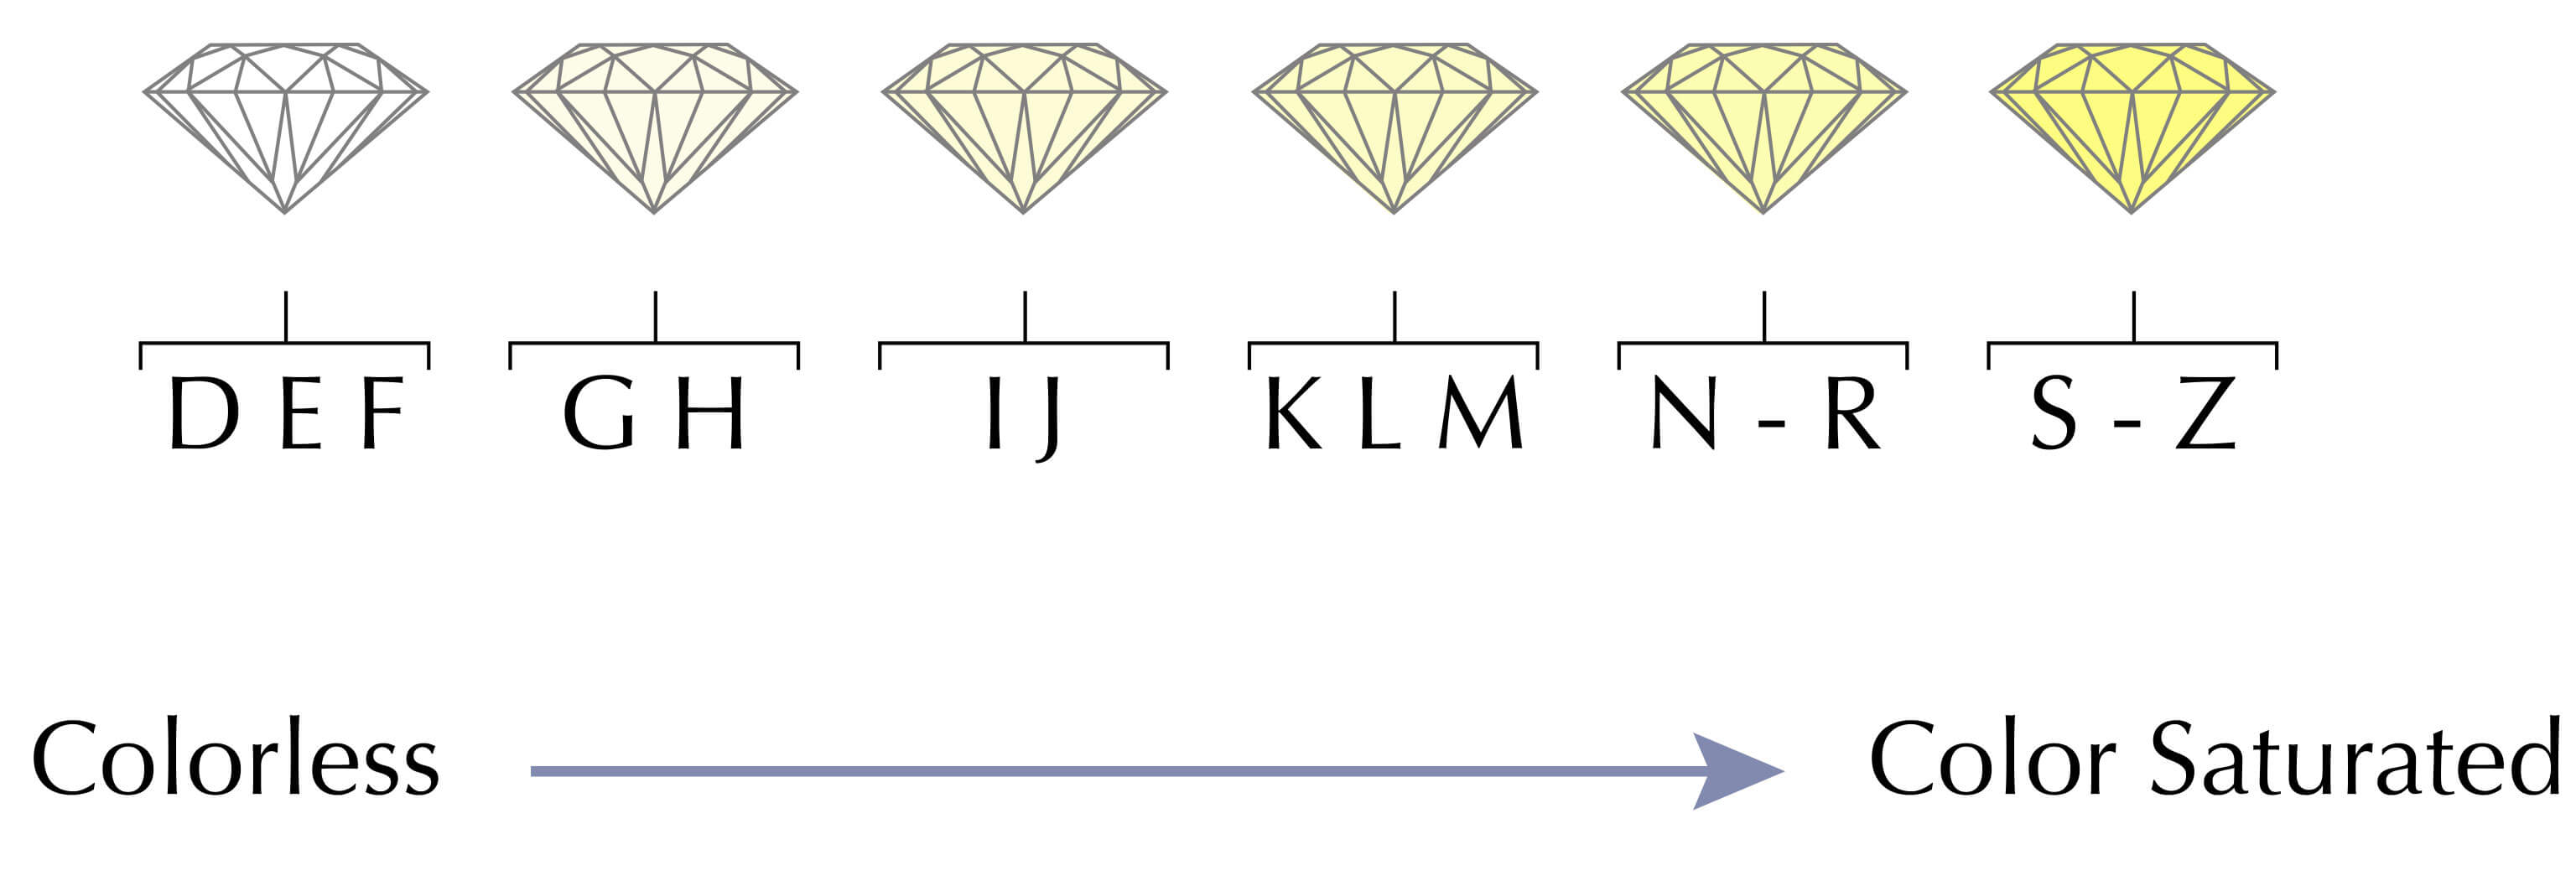 A diamond specification picture